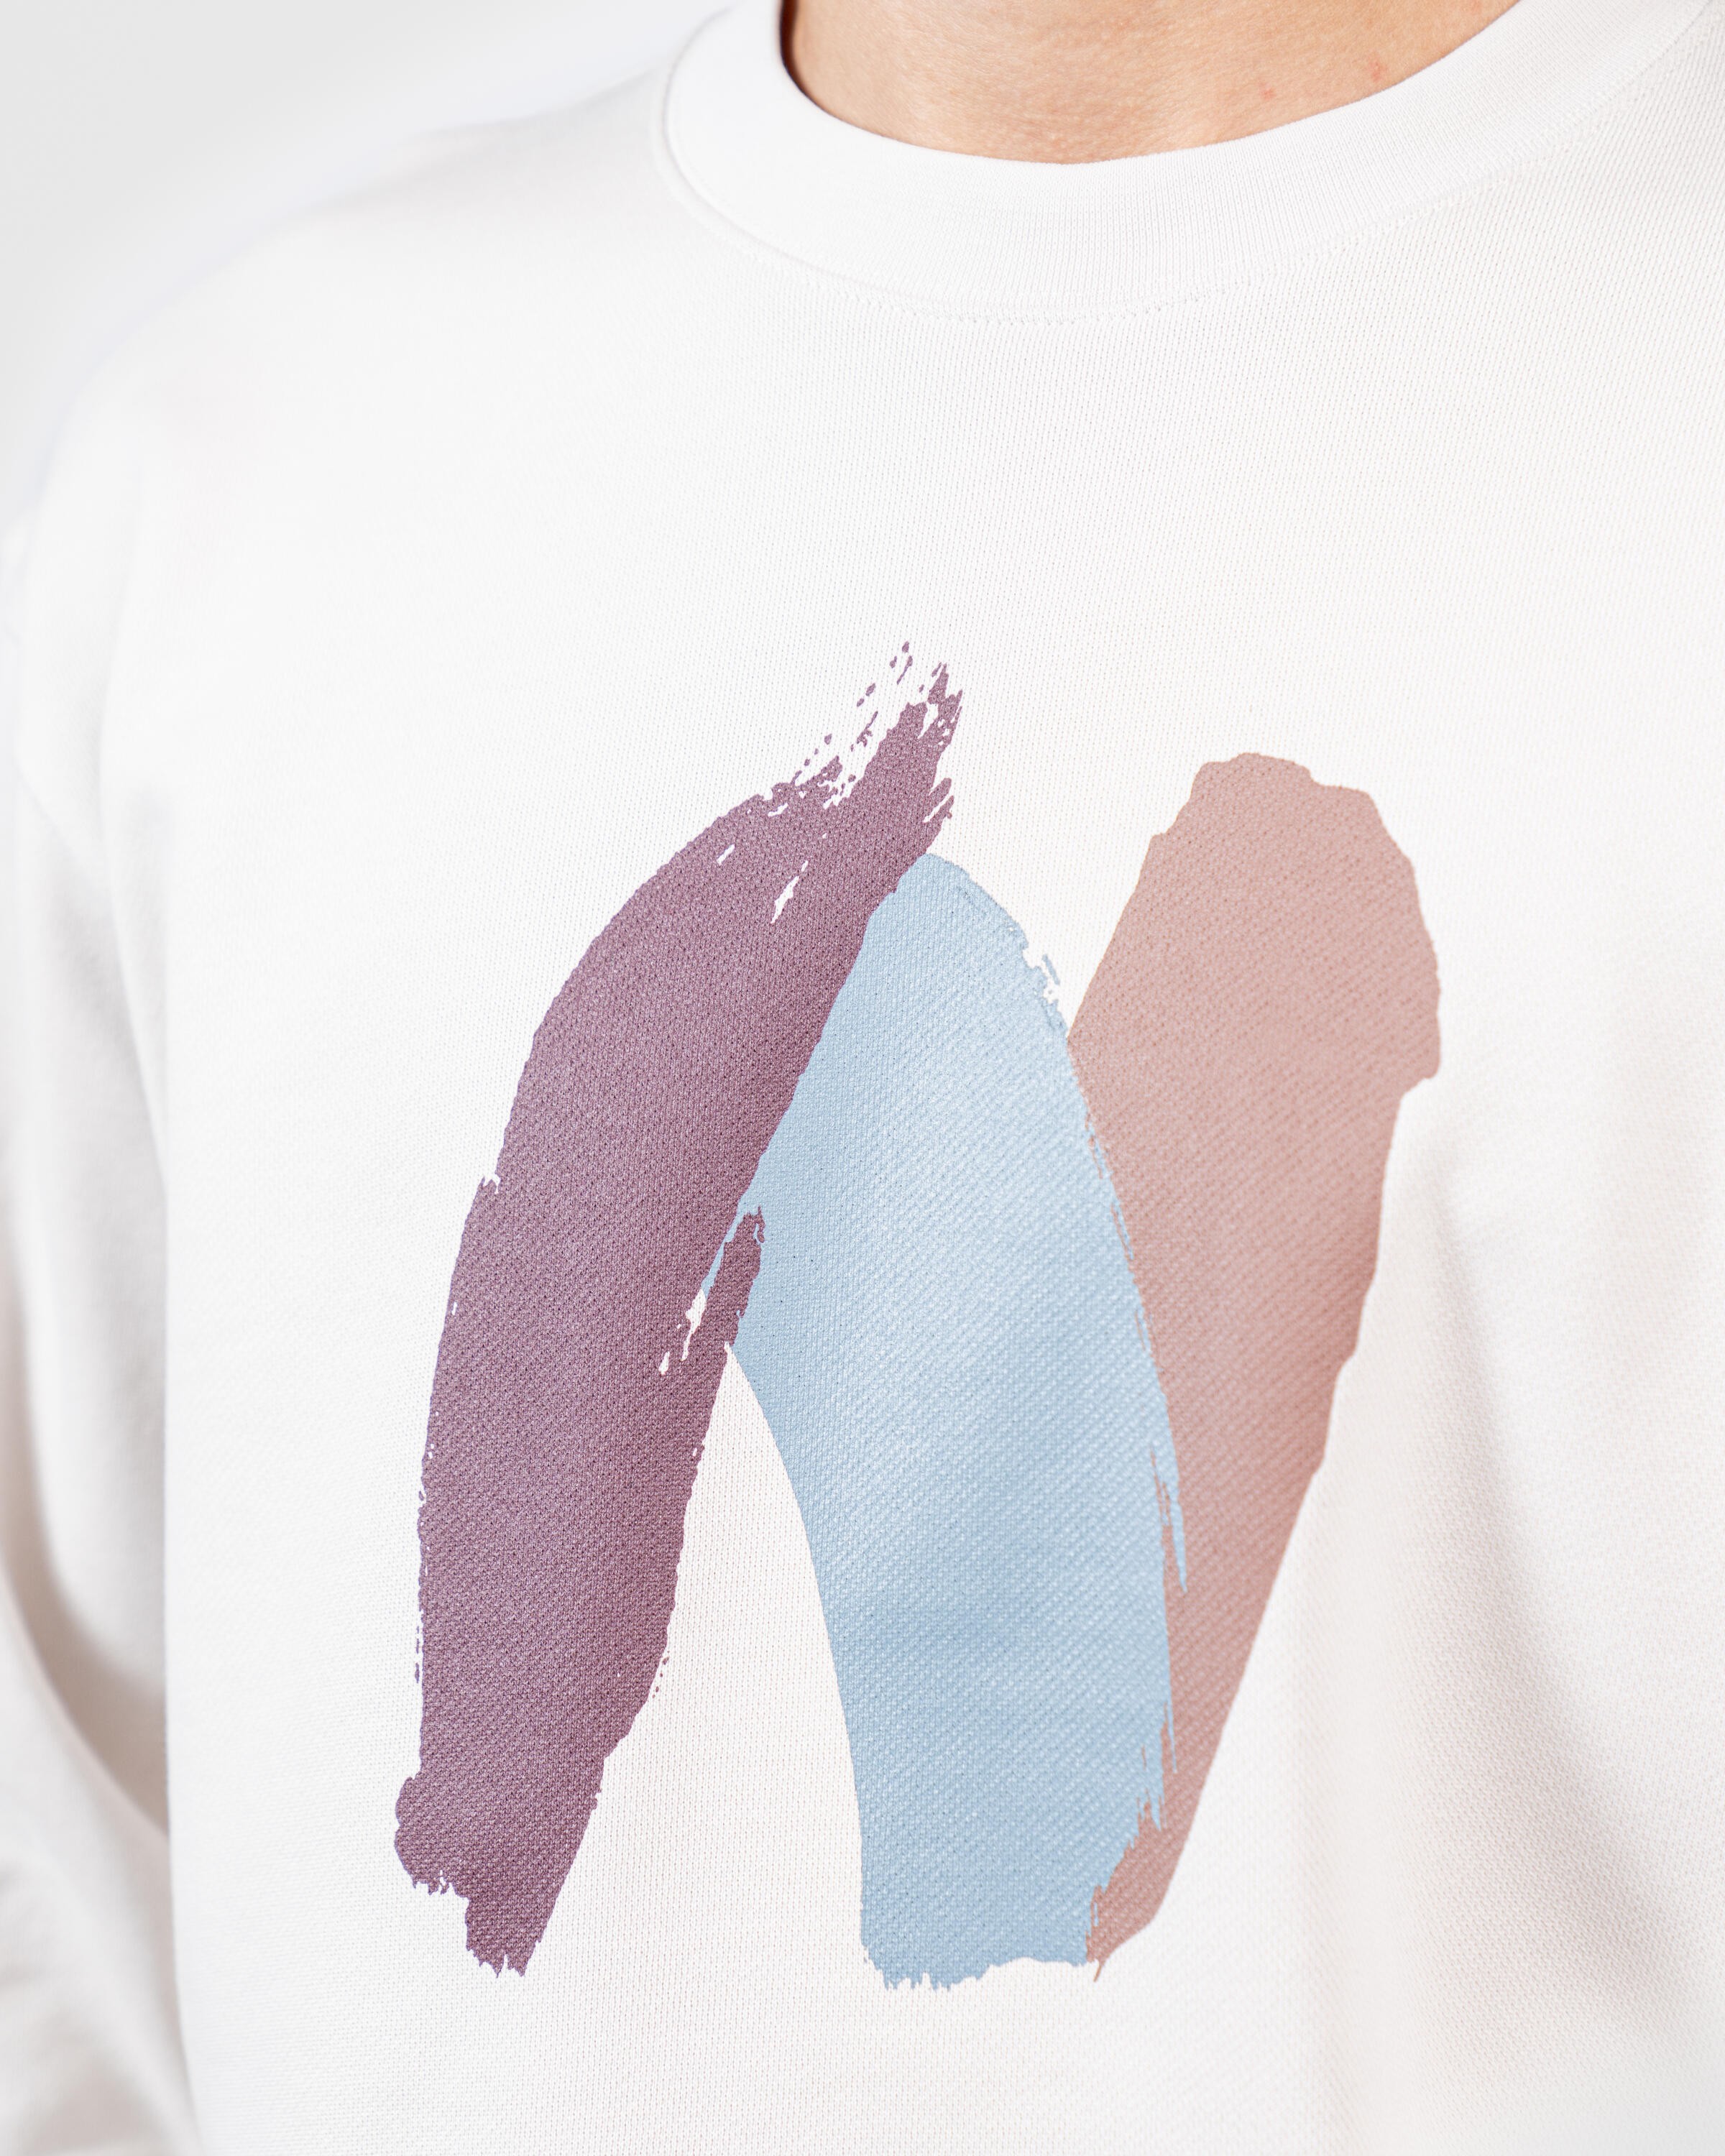 Norse Projects Arne Relaxed Brush N Logo Sweatshirt